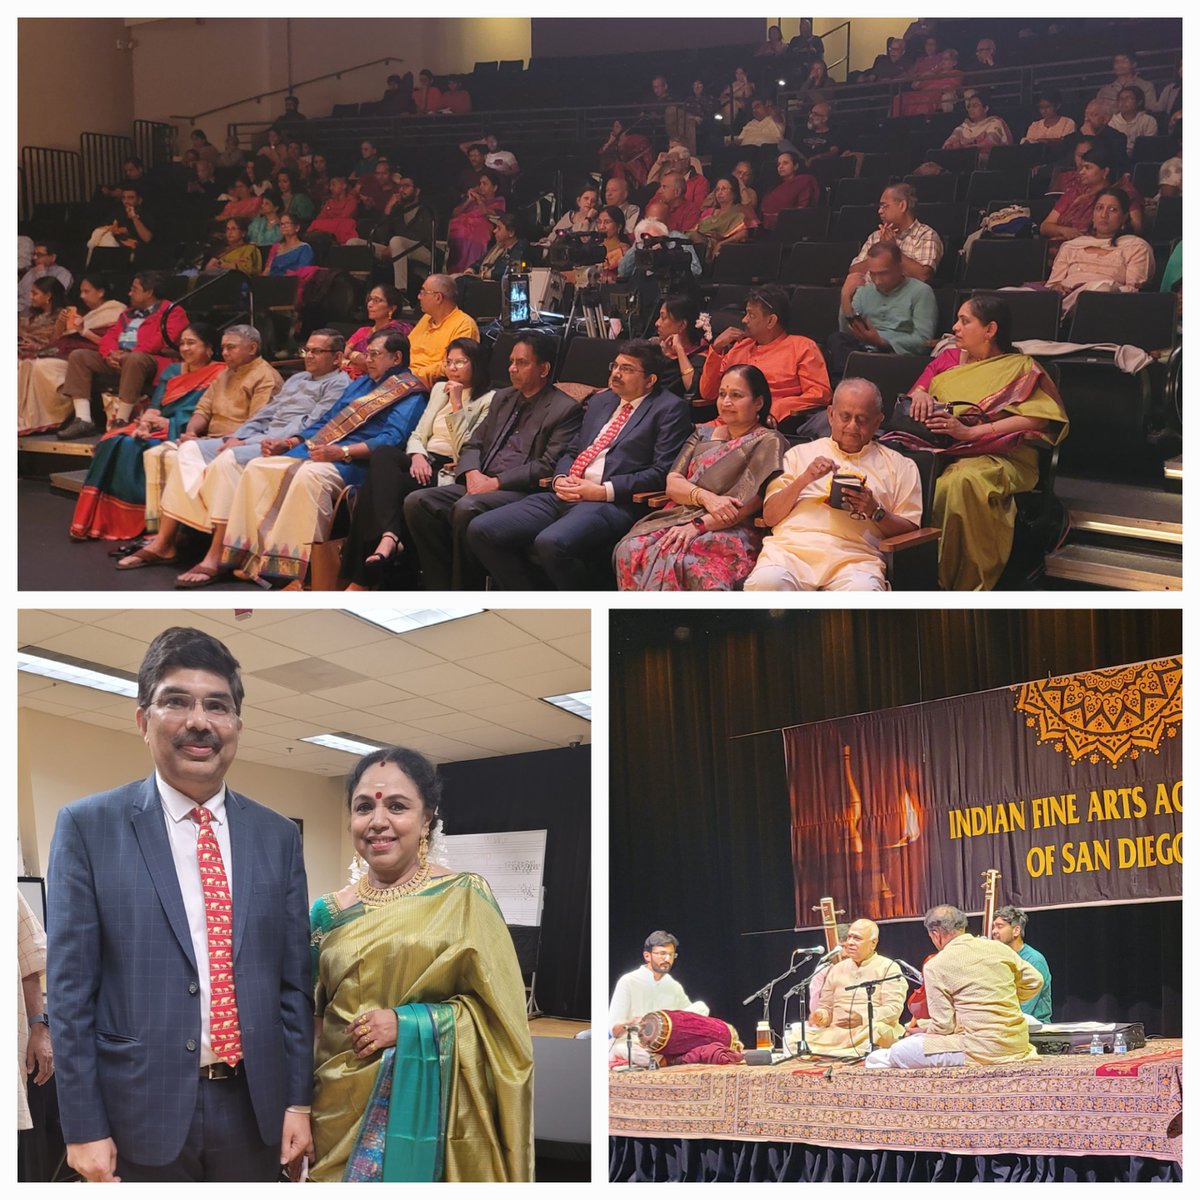 Consul General Dr.K.Srikar Reddy graced the 17th Indian Music & Dance Festival on March 23rd in San Diego, organized by the Indian Fine Arts Academy of San Diego under the leadership of Shekar Viswanathan. Consul General presented life time achievement [Vidya Nidhi] awards to…